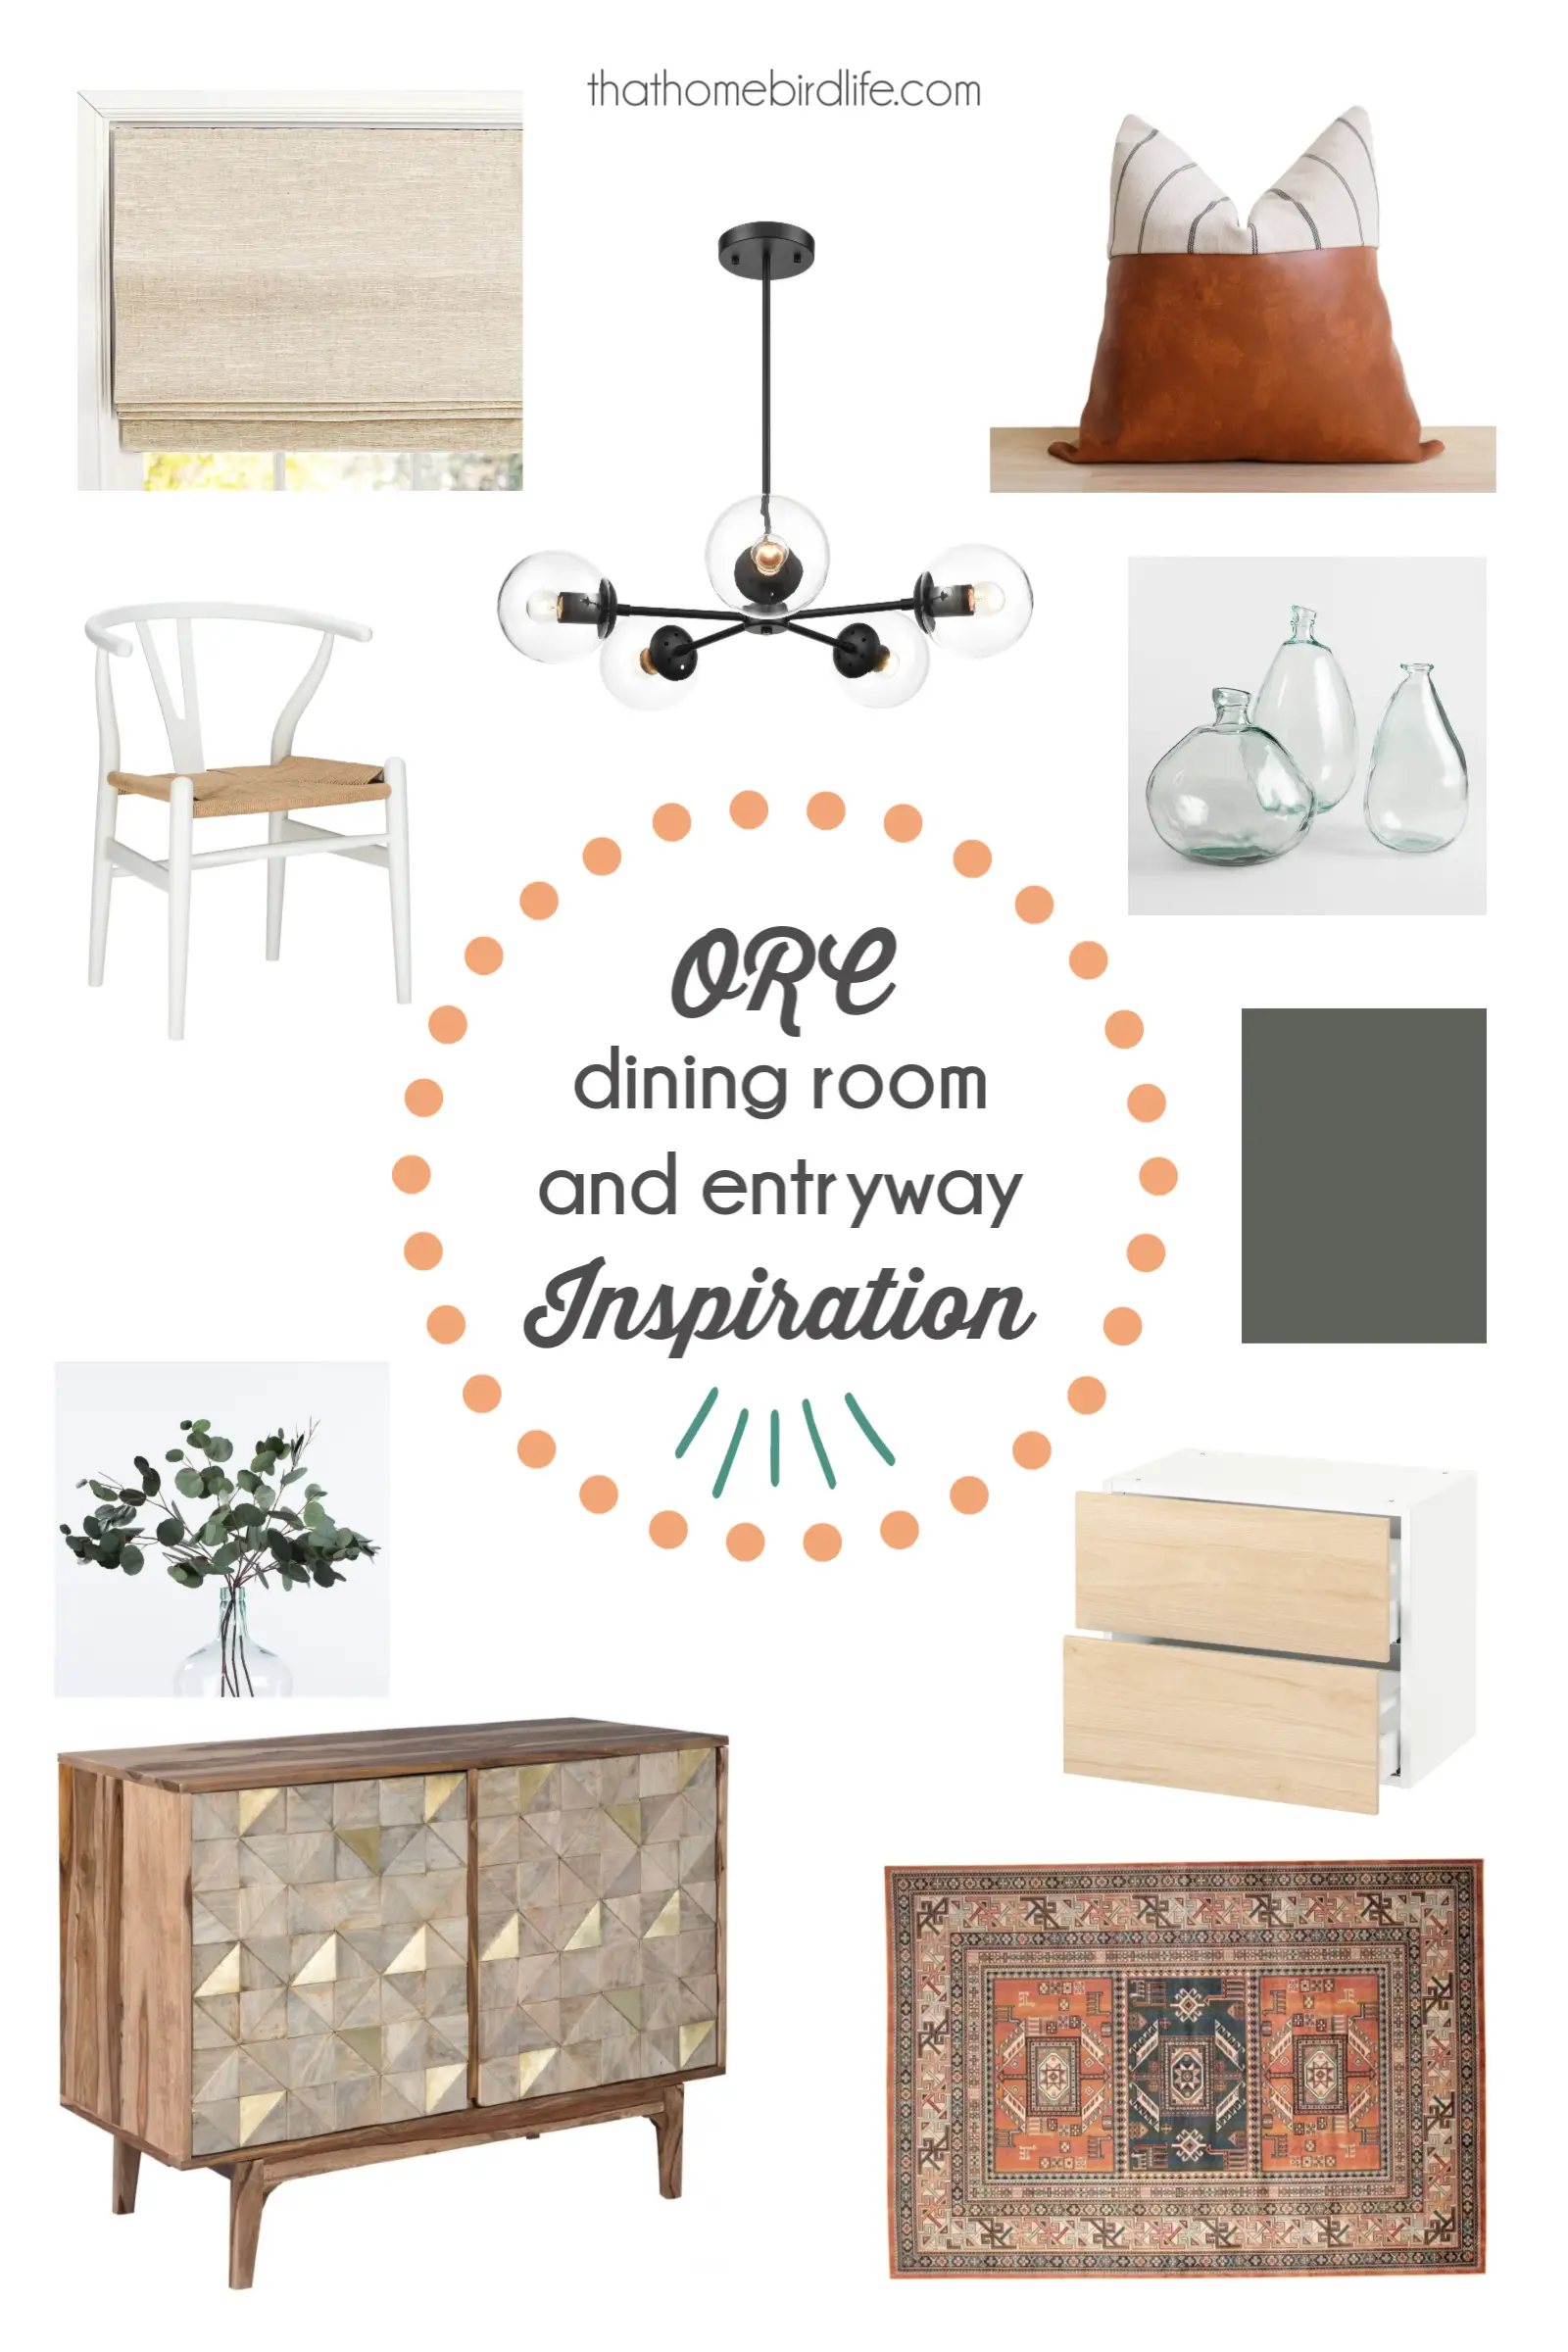 mood board for a dining room and entryway